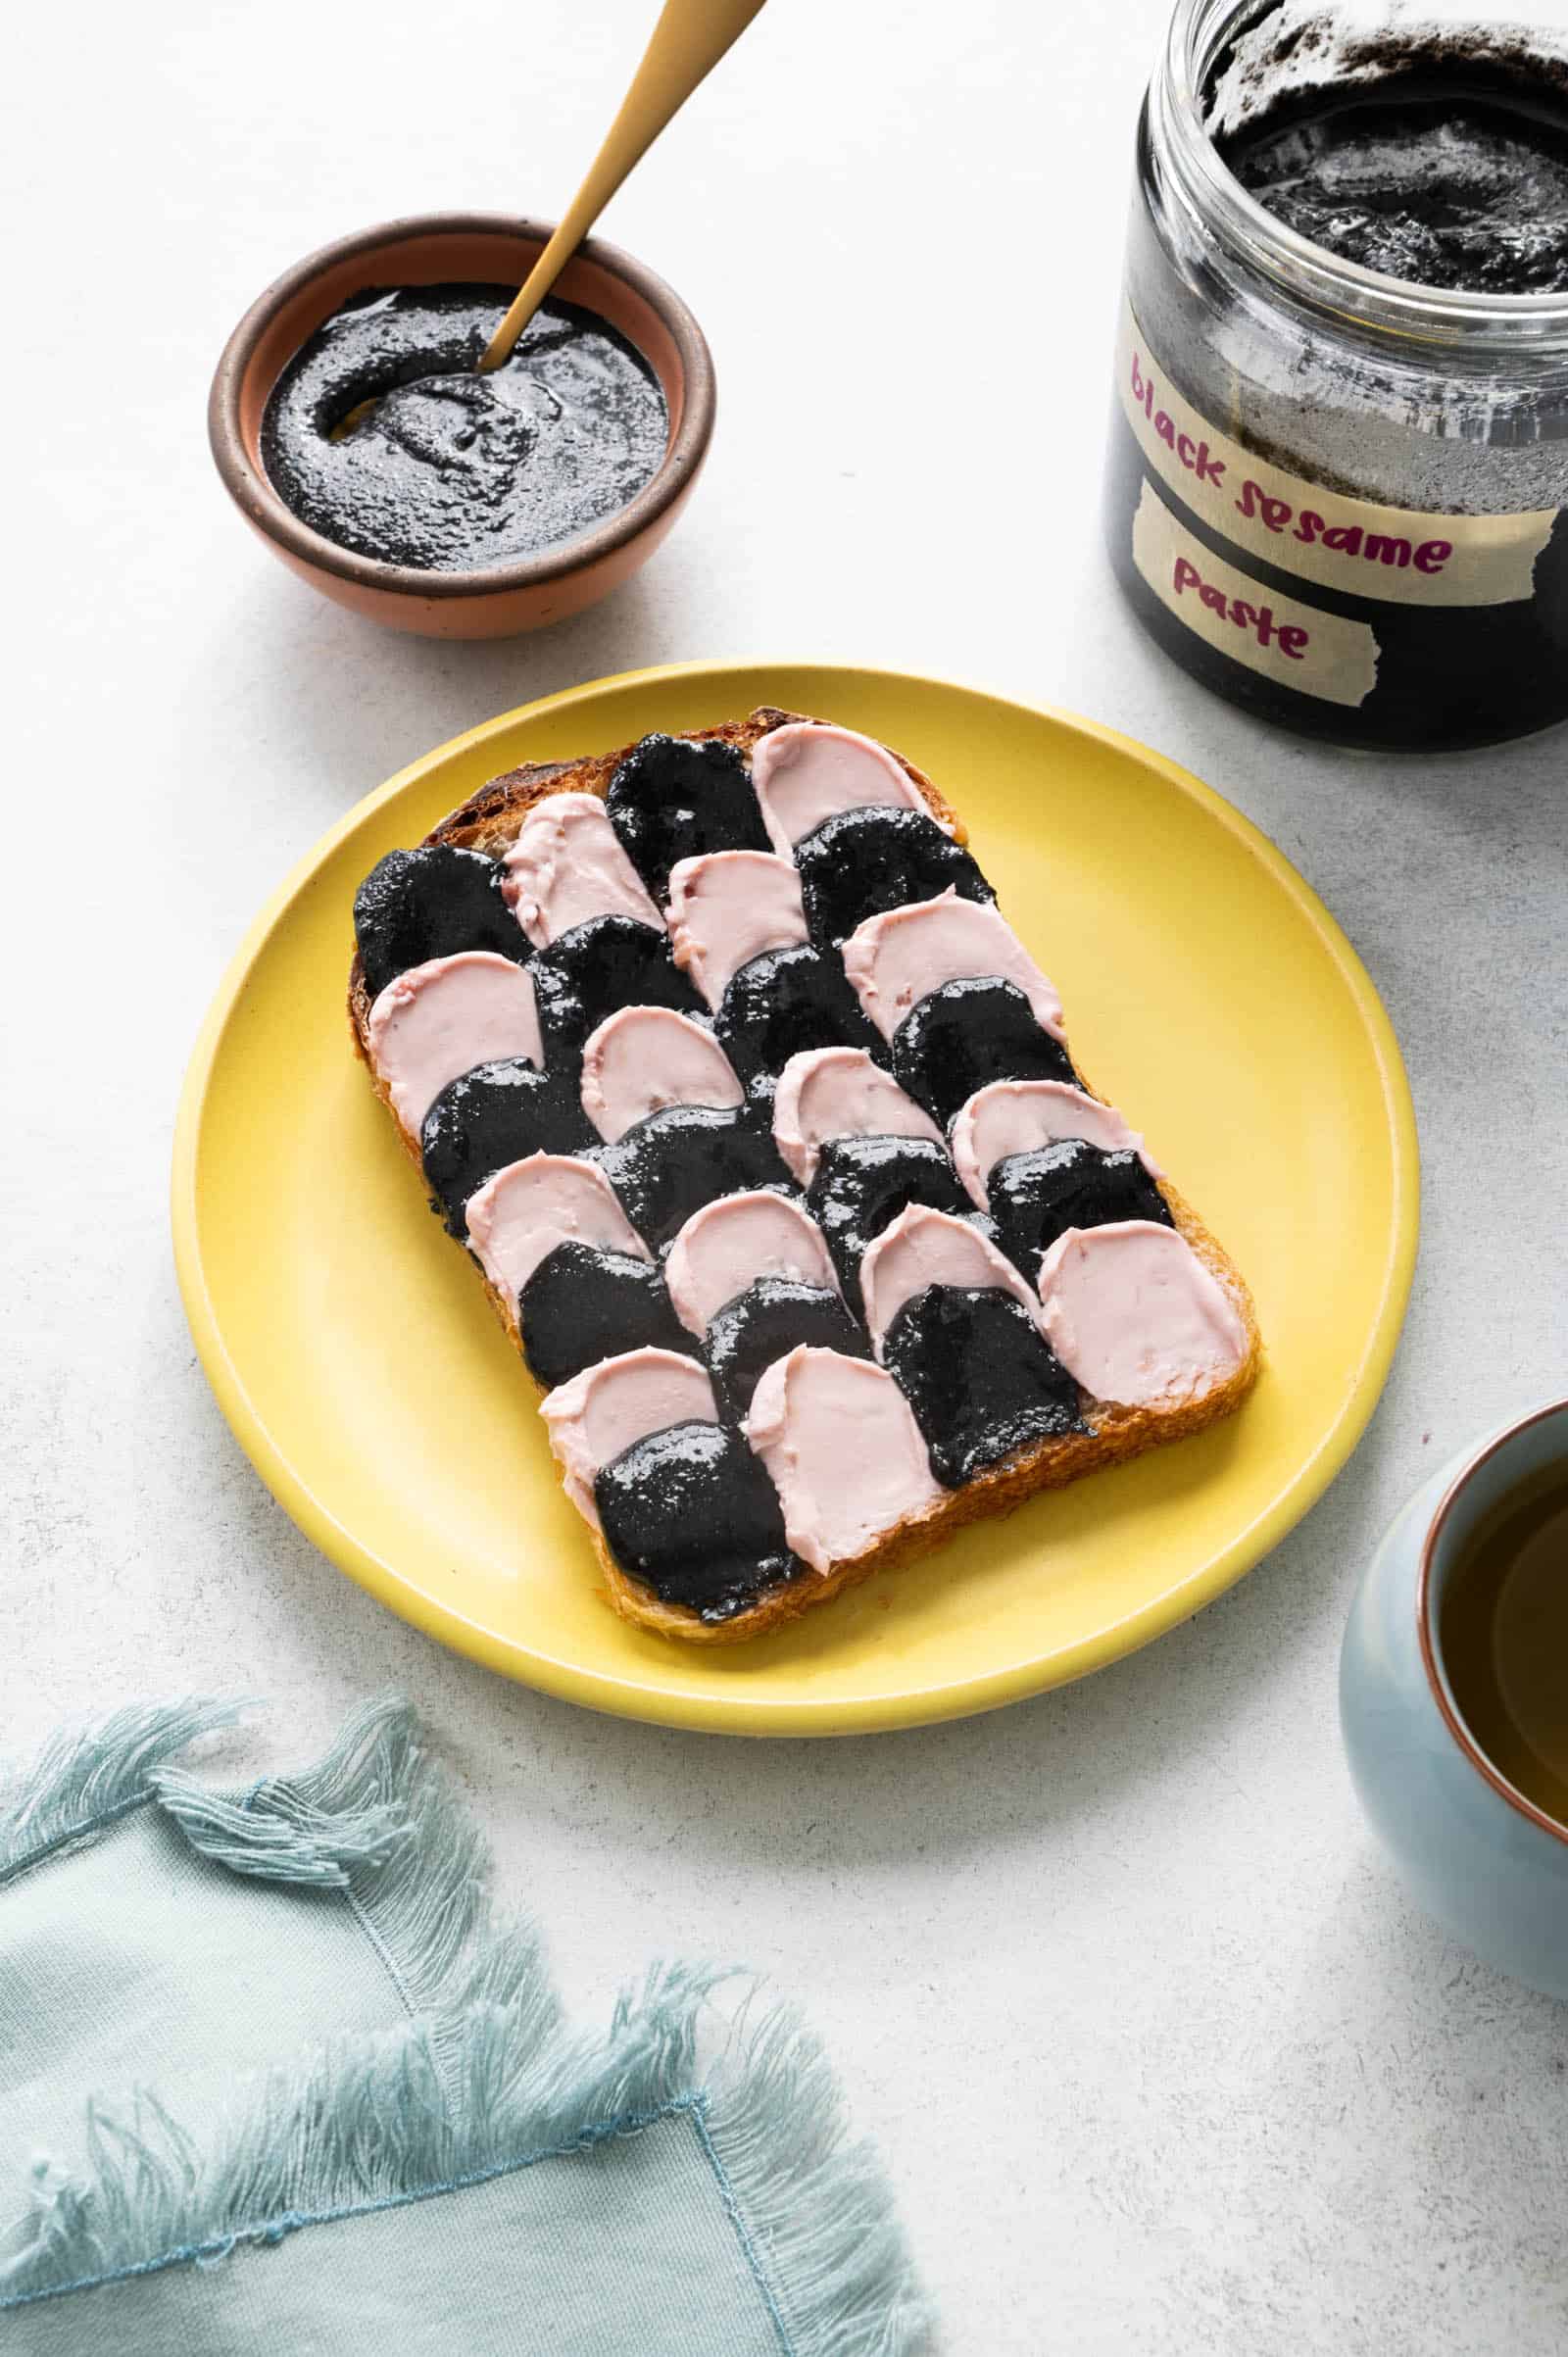 Black Sesame Paste and Strawberry Cream Cheese on Toast